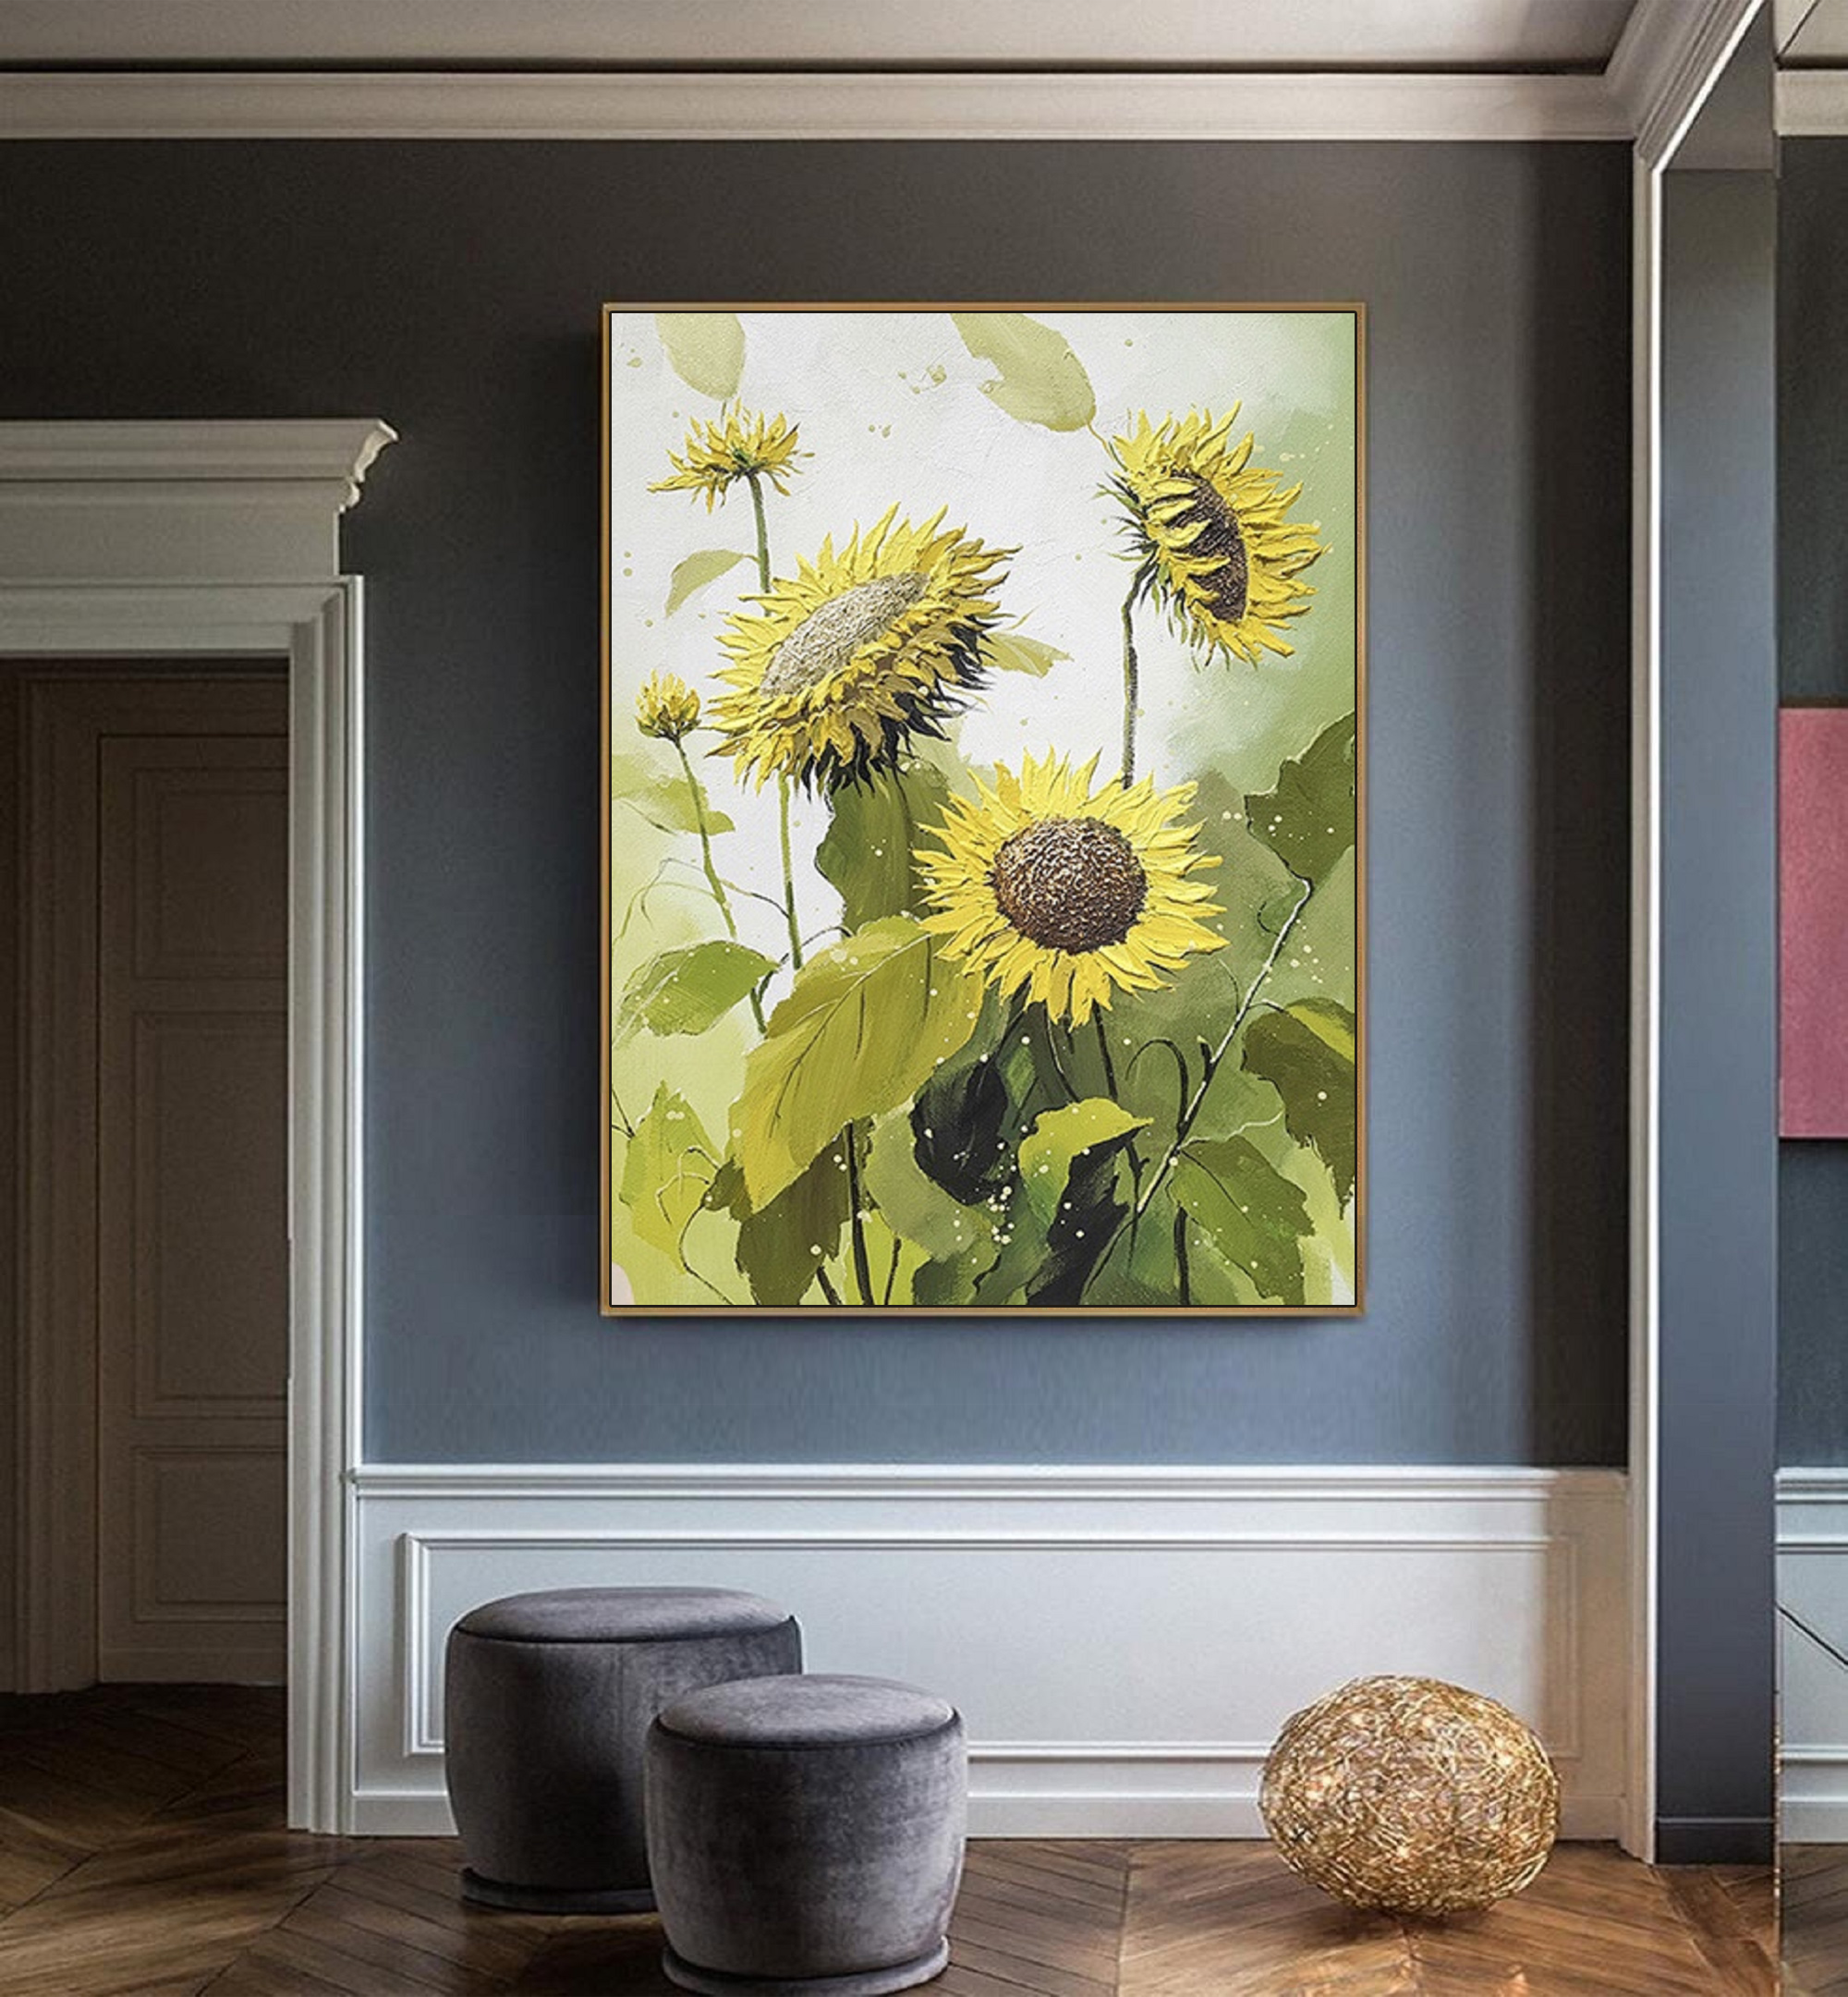 Canvas Art, Sunflowers Oil Paintings. Wall Pictures for Home